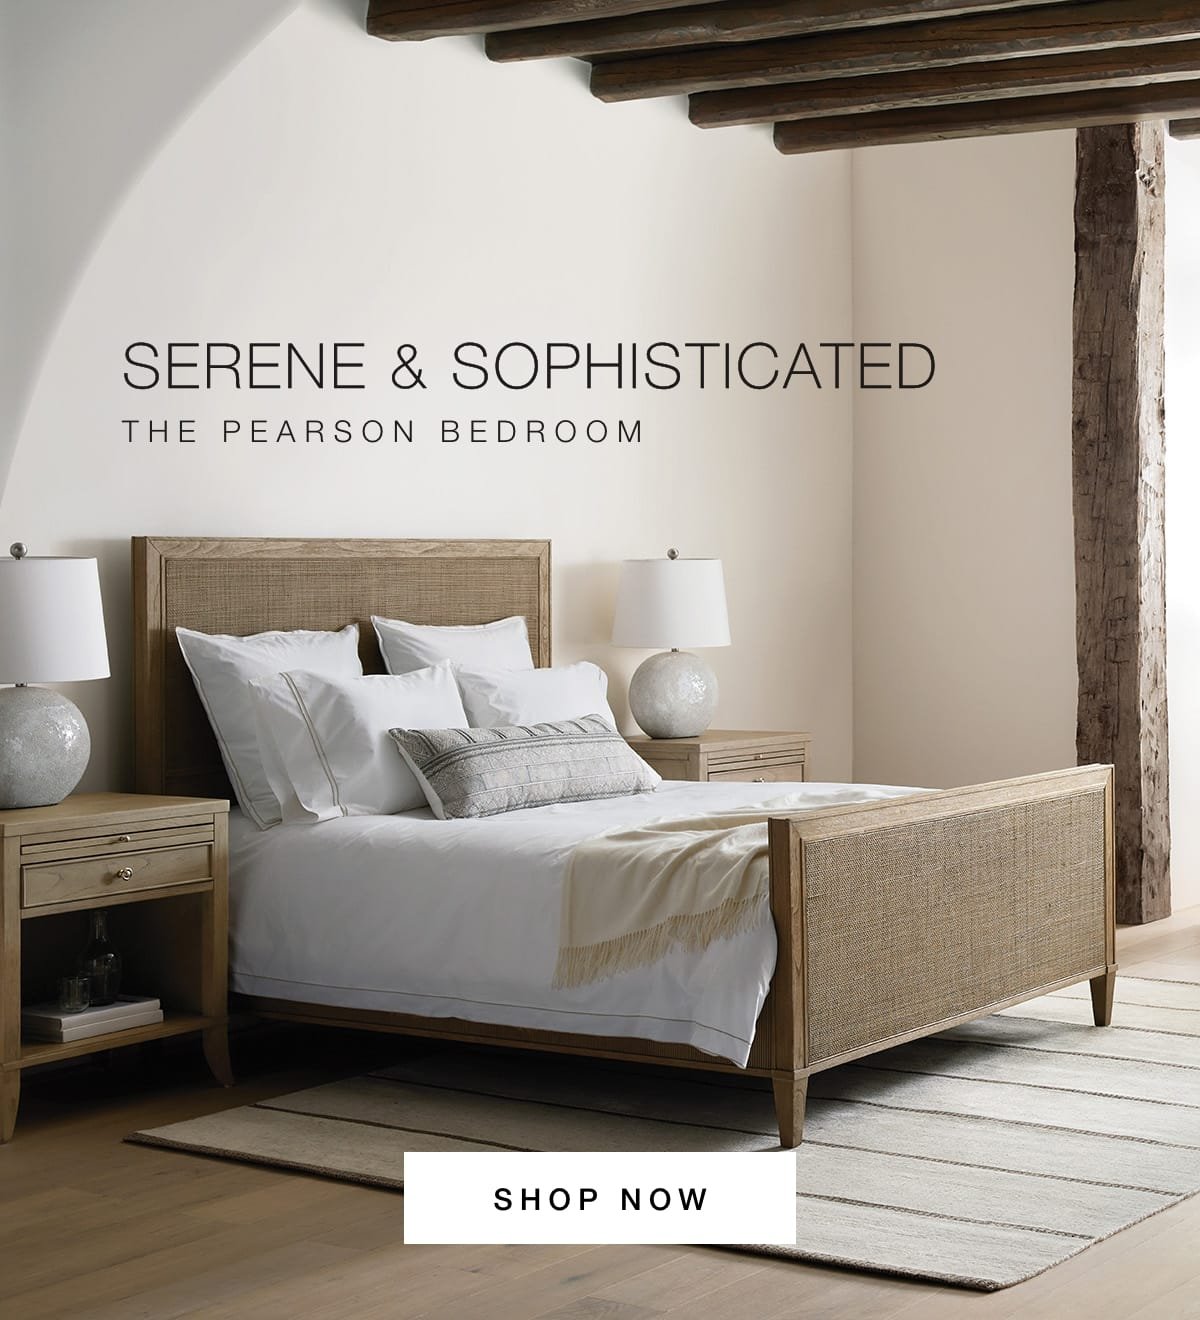 The Pearson Bedroom